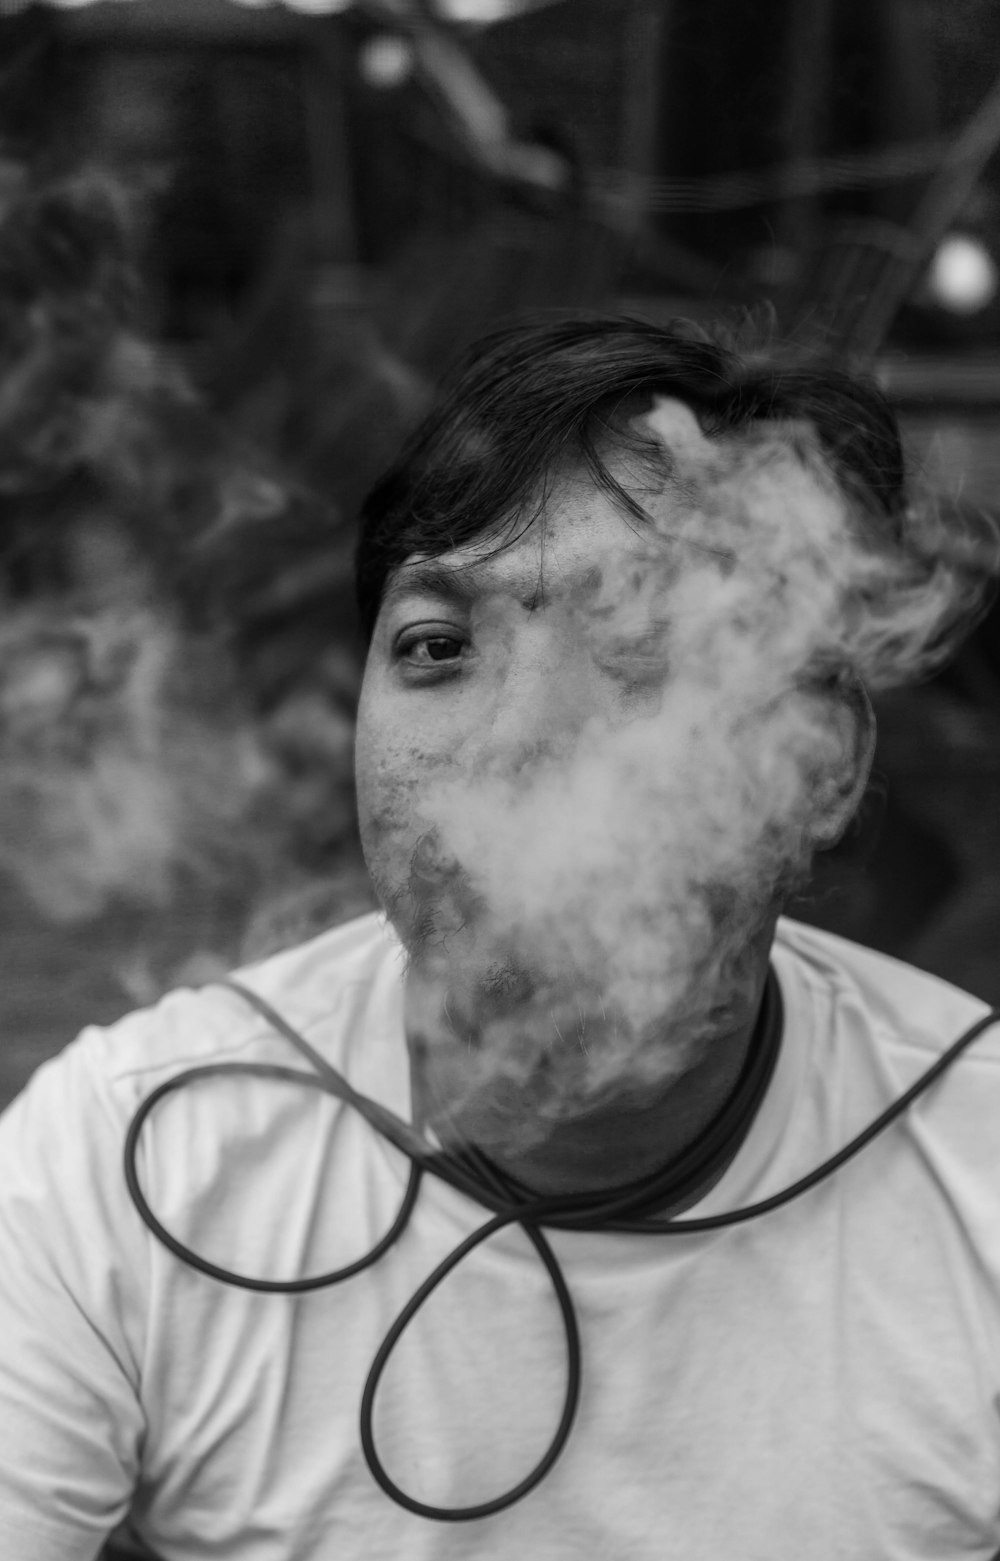 a man is smoking a cigarette in a black and white photo